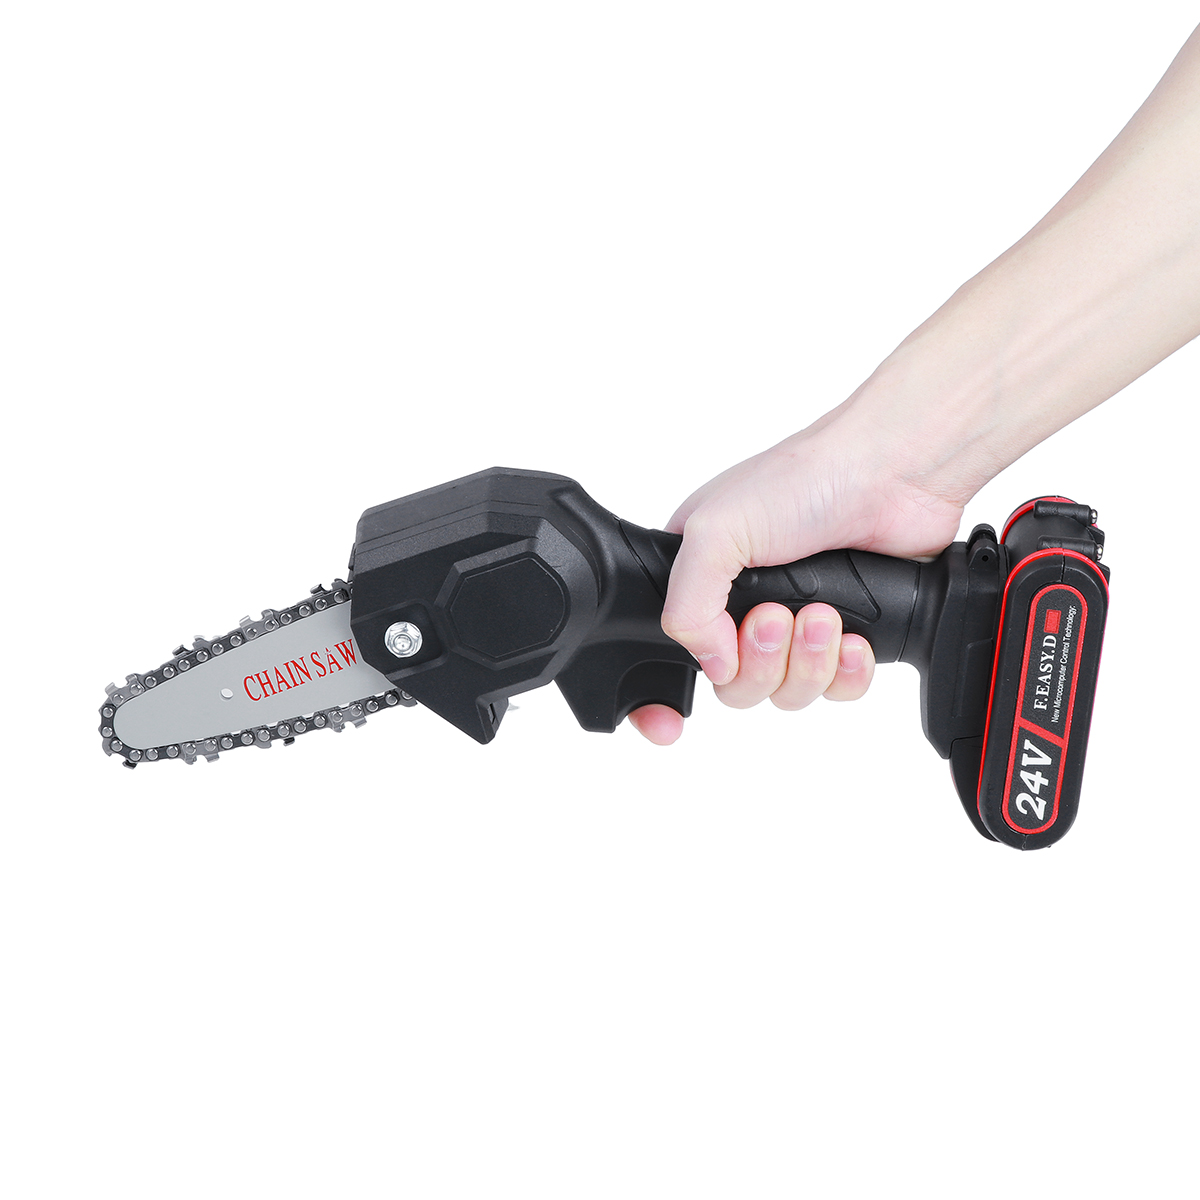 4-24V-Rechargeable-Cordless-Electric-Saw-Mini-Handheld-Chainsaw-Wood-Cutter-Tool-1801610-8